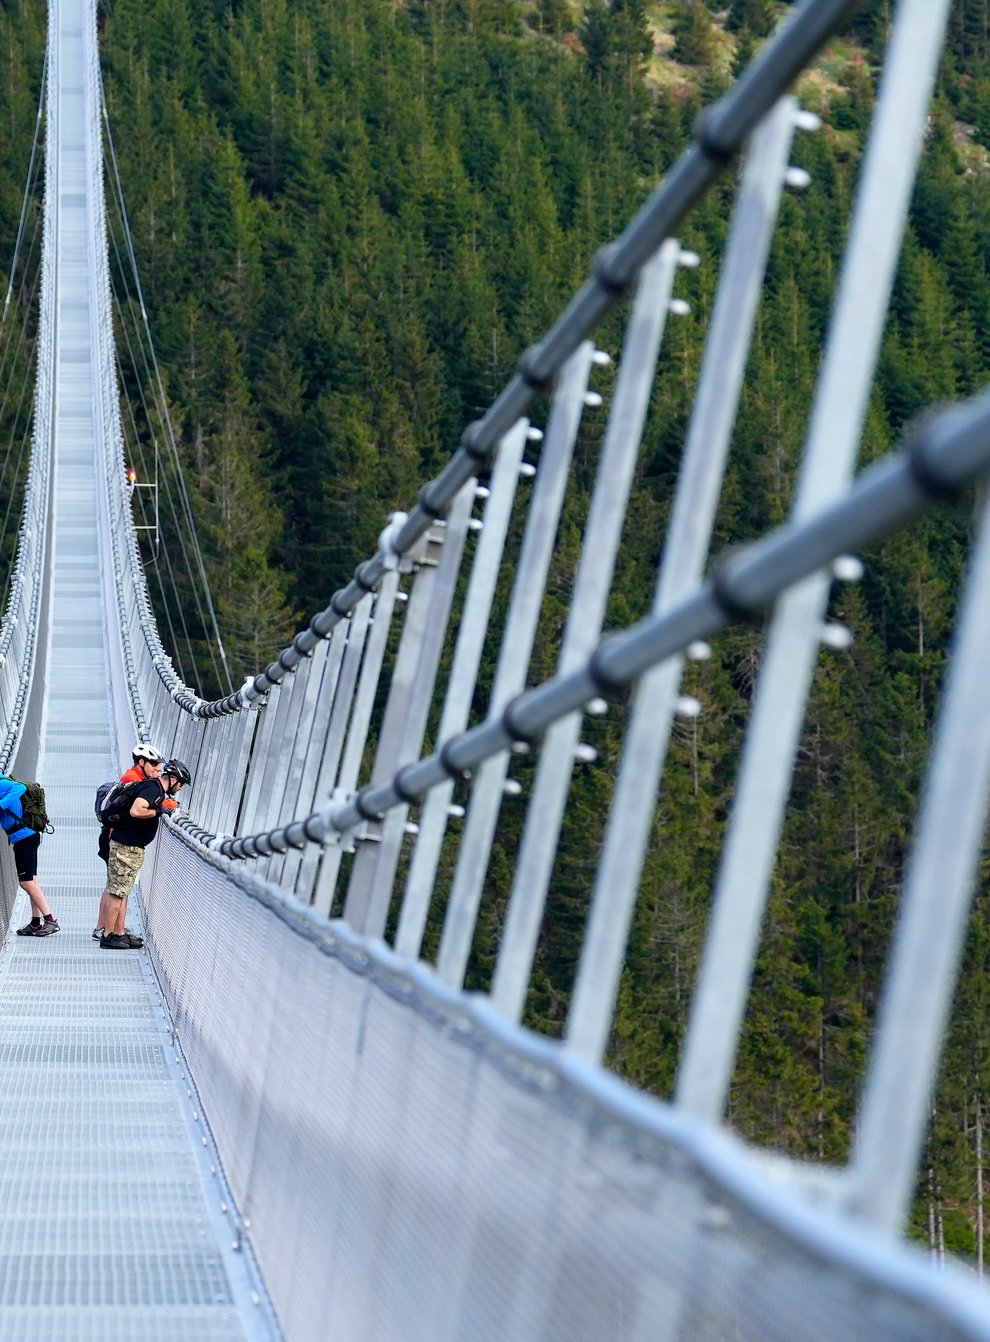 People stand on the suspension bridge a day before its official opening at a mountain resort in Dolni Morava, Czech Republic (Petr David Josek/AP)